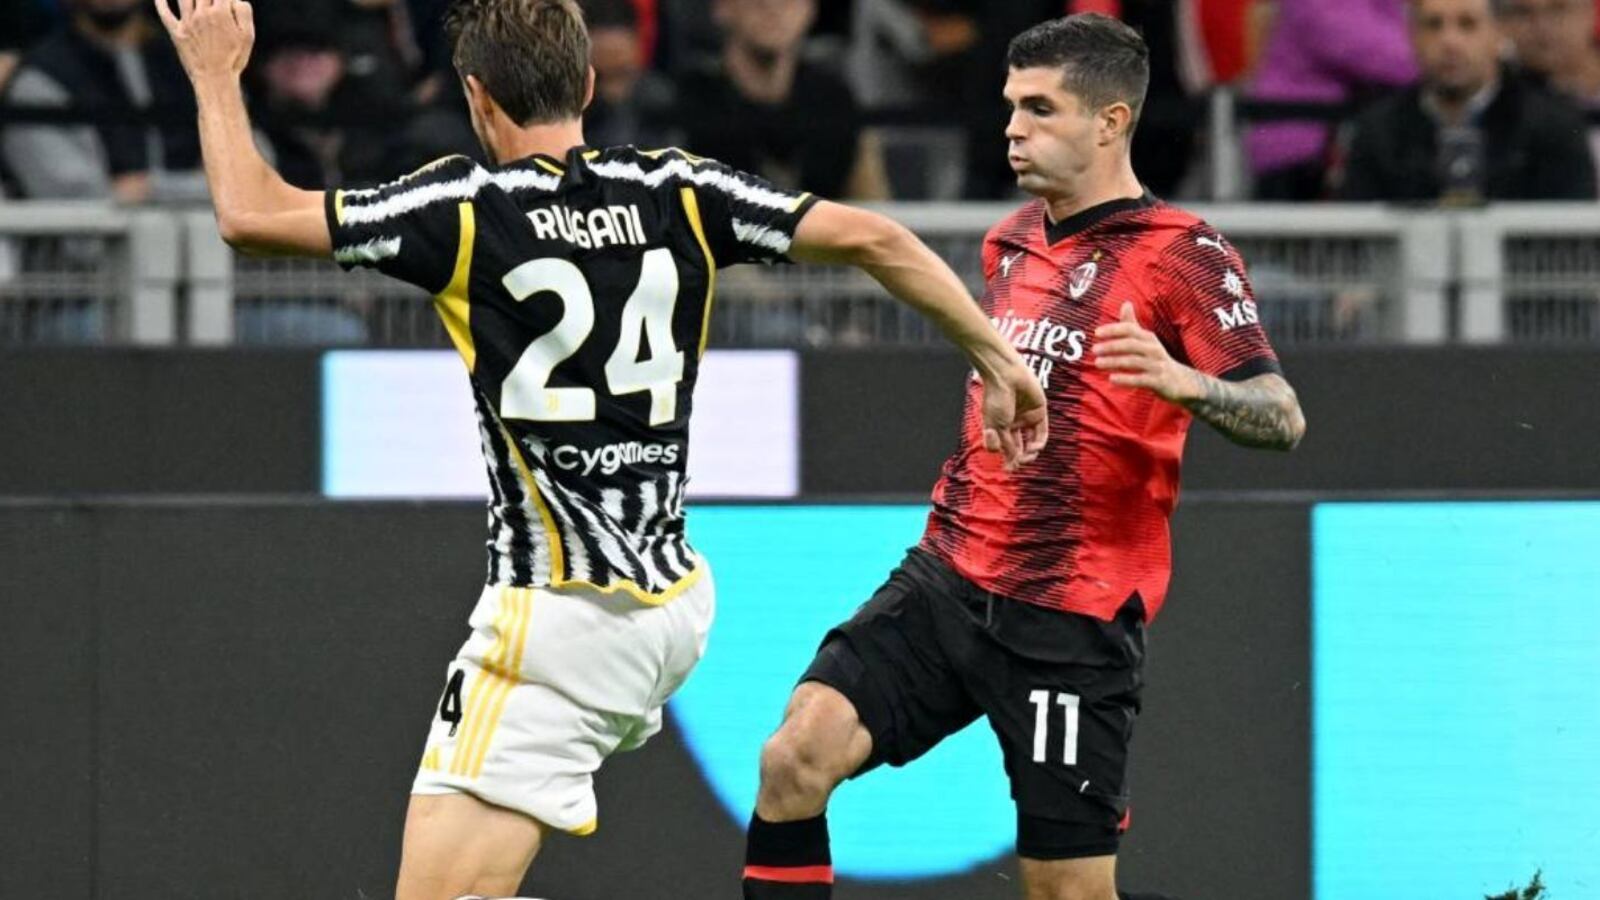 Fox Sports has made a major error in promoting Christian Pulisic's AC Milan match